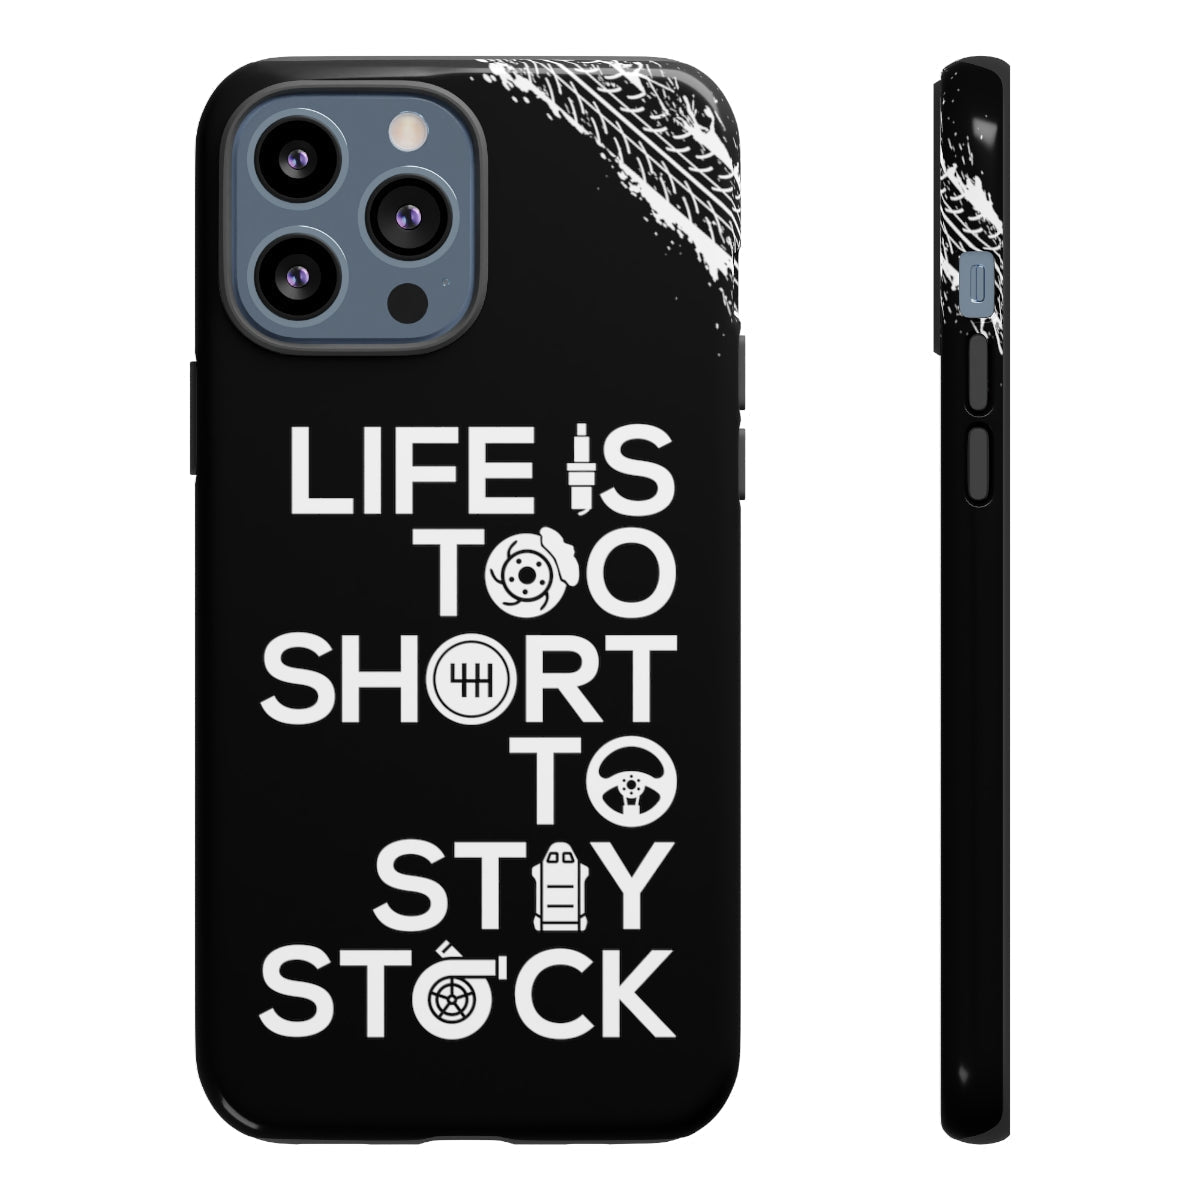 Life Too Short To Stay Stock - Car Phone Case - iPhone 13 Pro Max